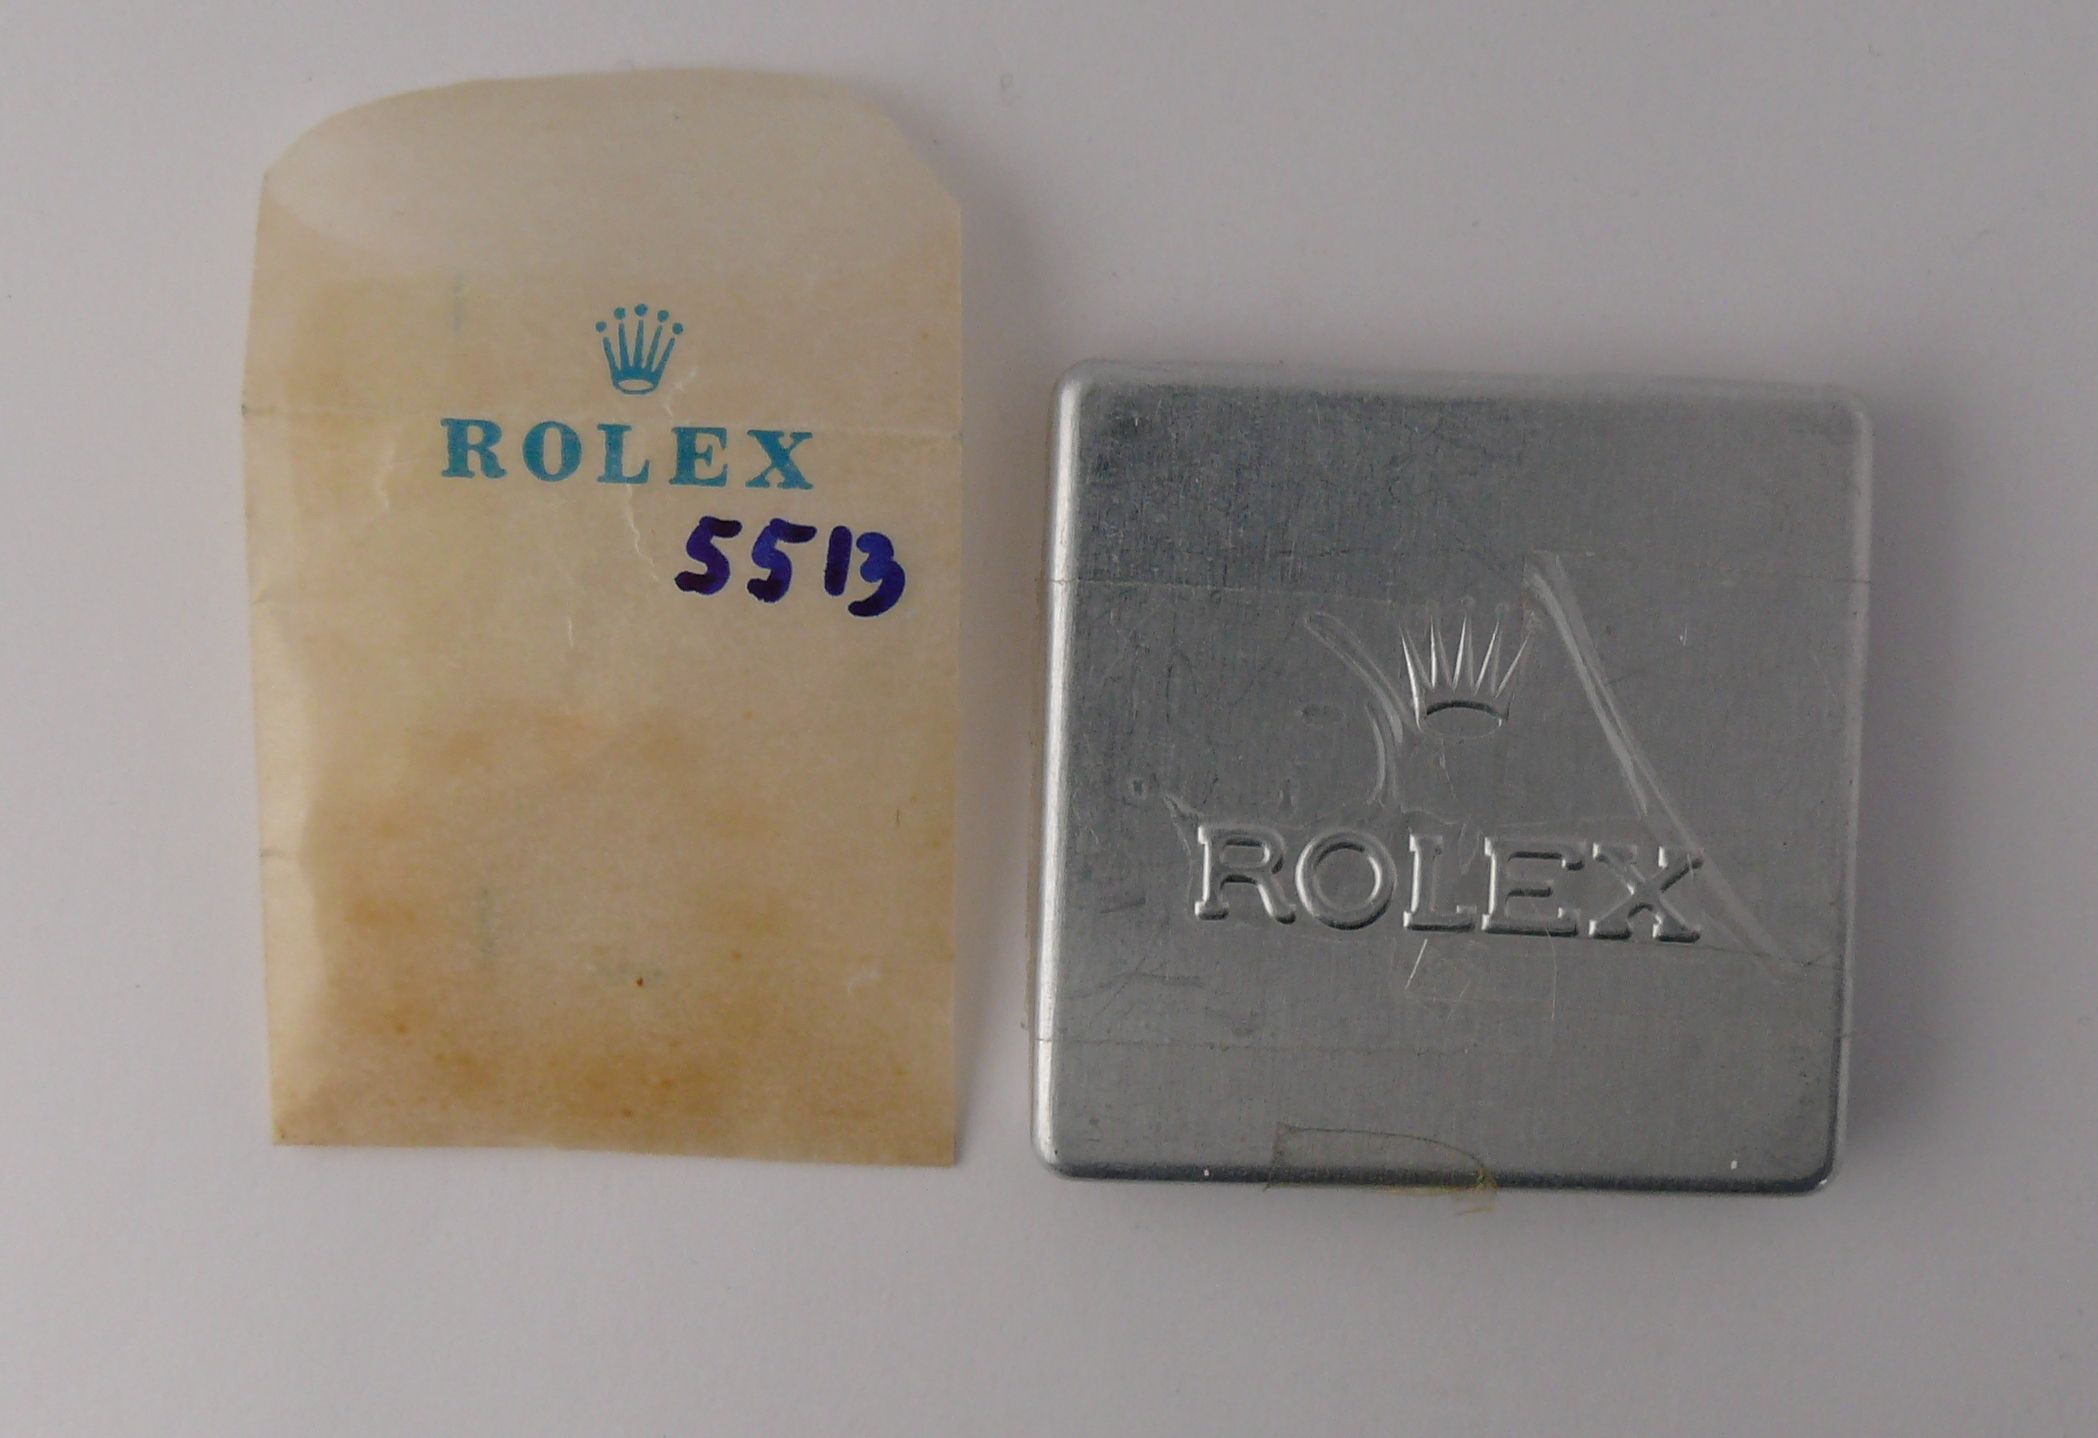 rolex metal tiffin box numbered 5513 - Image 2 of 3